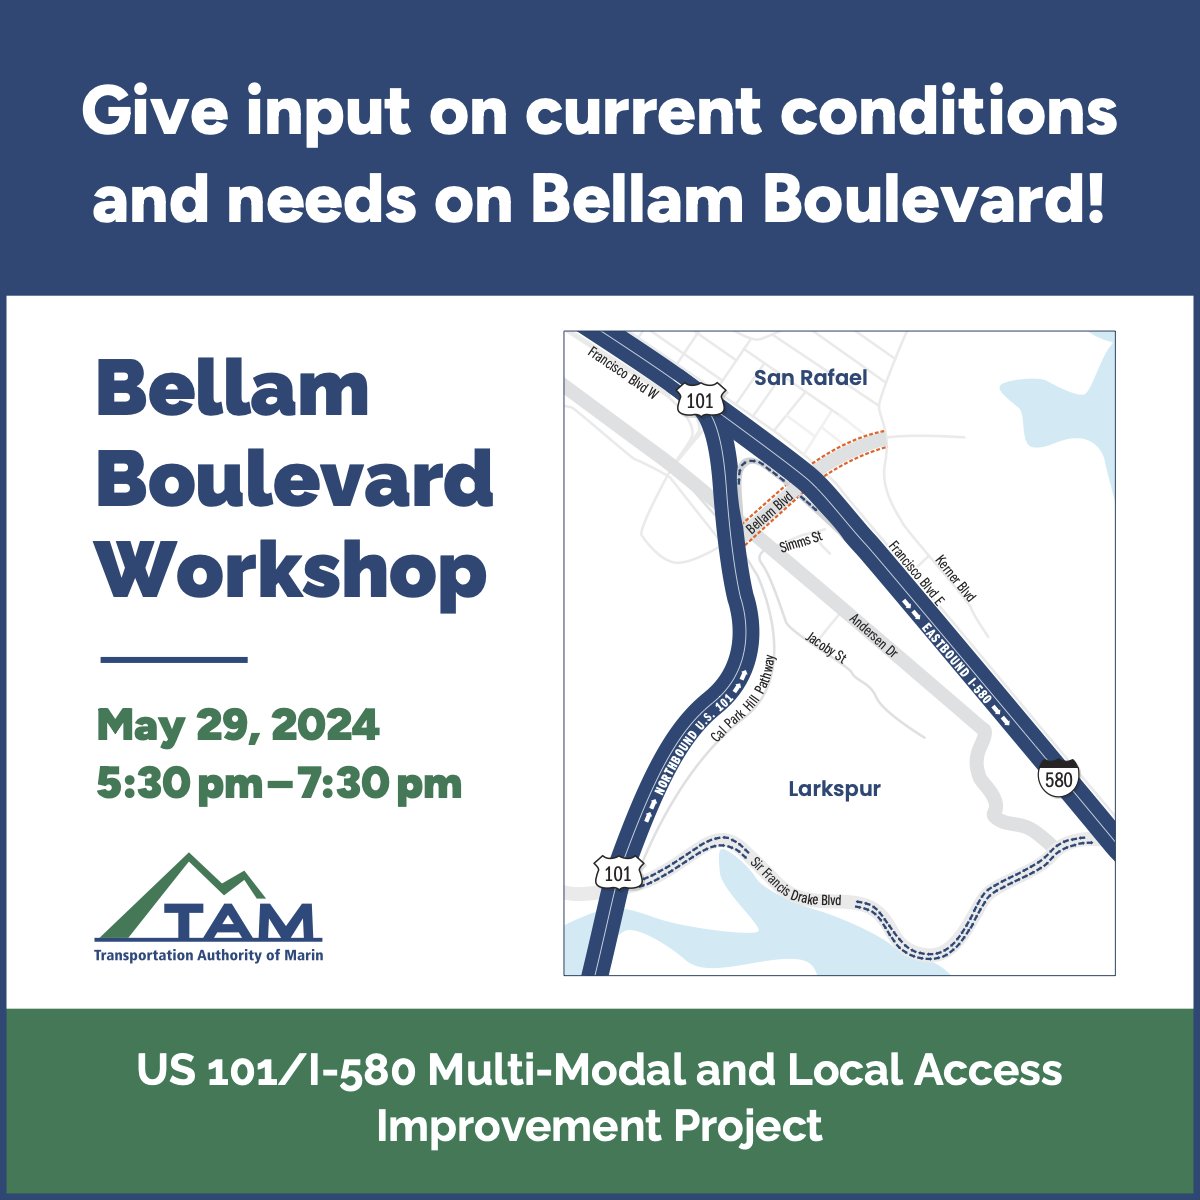 Exciting News for #SanRafael! TAM is holding a workshop aimed at identifying community needs and solutions for Bellam Boulevard! Join us at the Marin Health and Wellness Connection Center on Wednesday May 29 to share your thoughts. Learn more at marin101-580.com